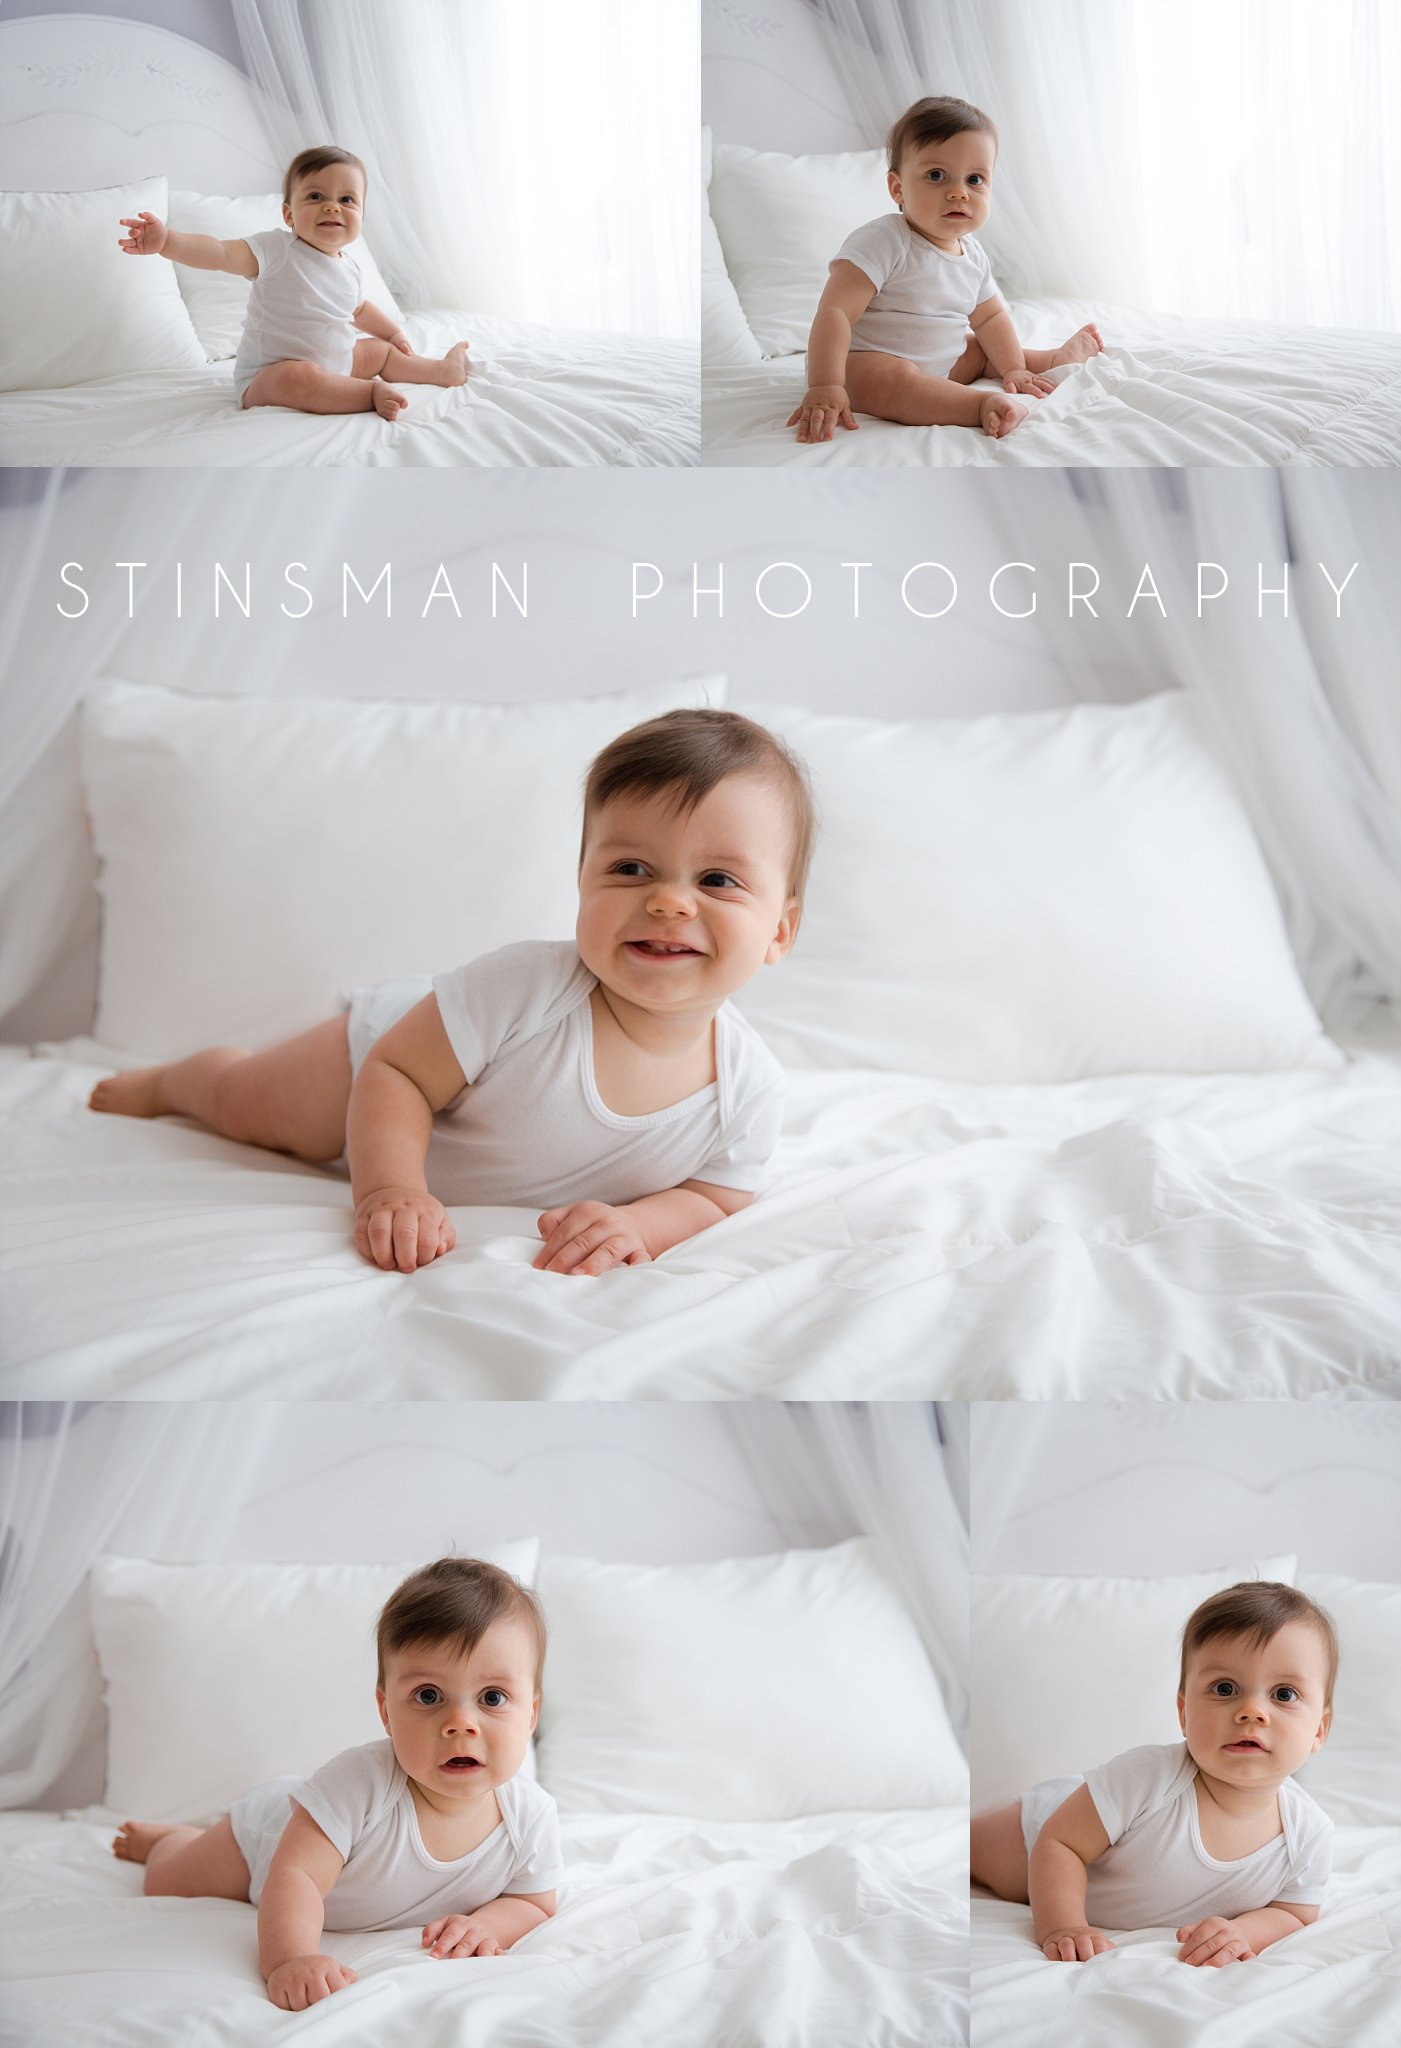 9 month old baby sitting on a bed making funny faces wearing a white shirt